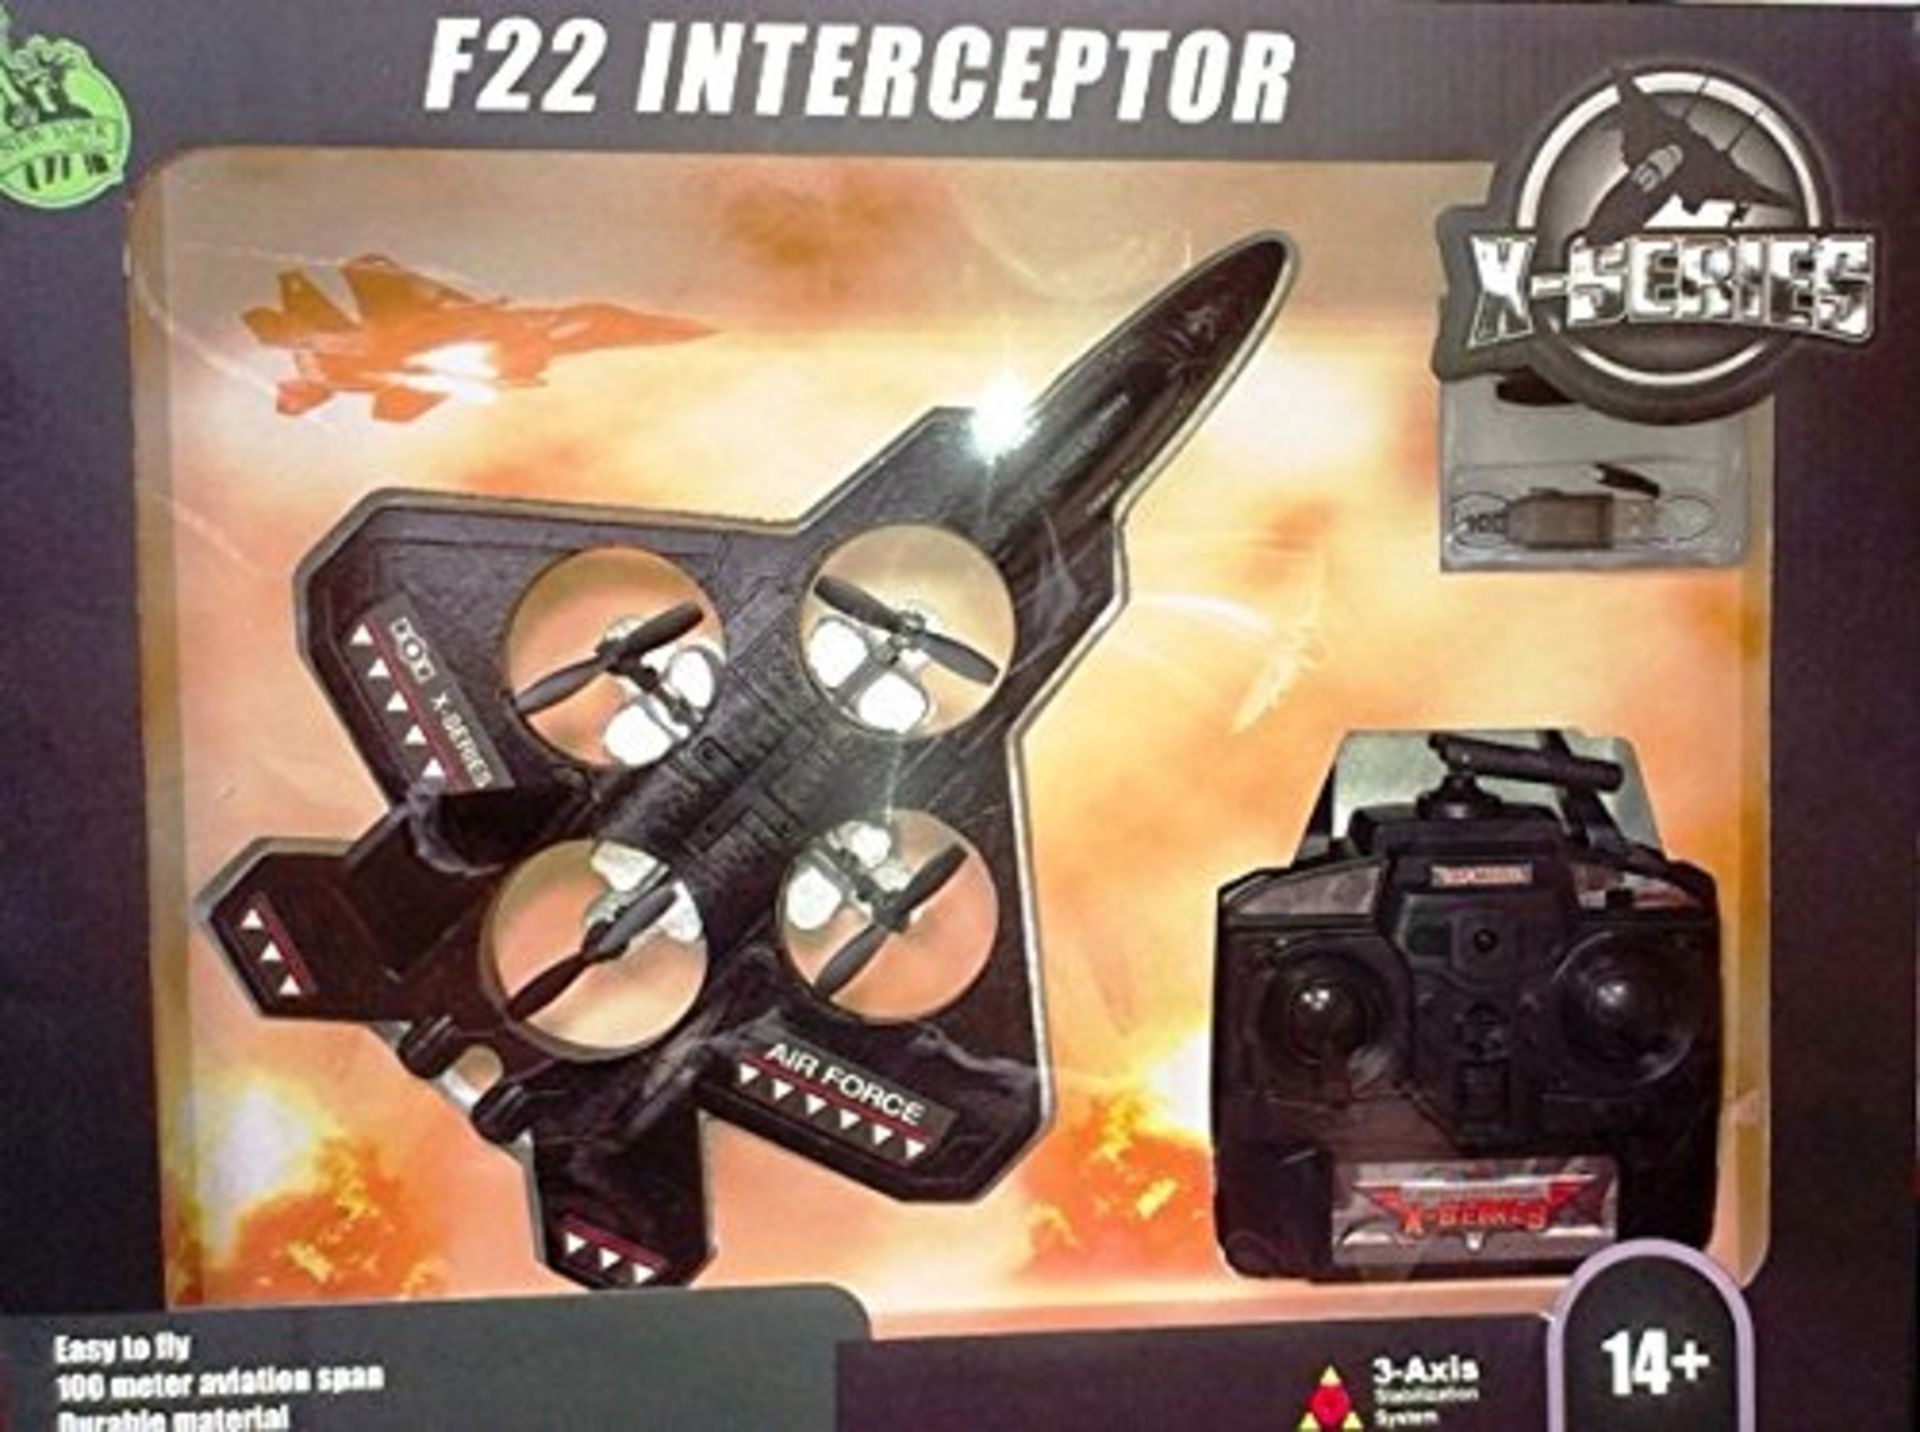 V Brand New X-series F22 Interceptor Radio Controlled Plane With 4 Channel 3 Axis Gyroscope - Image 2 of 2